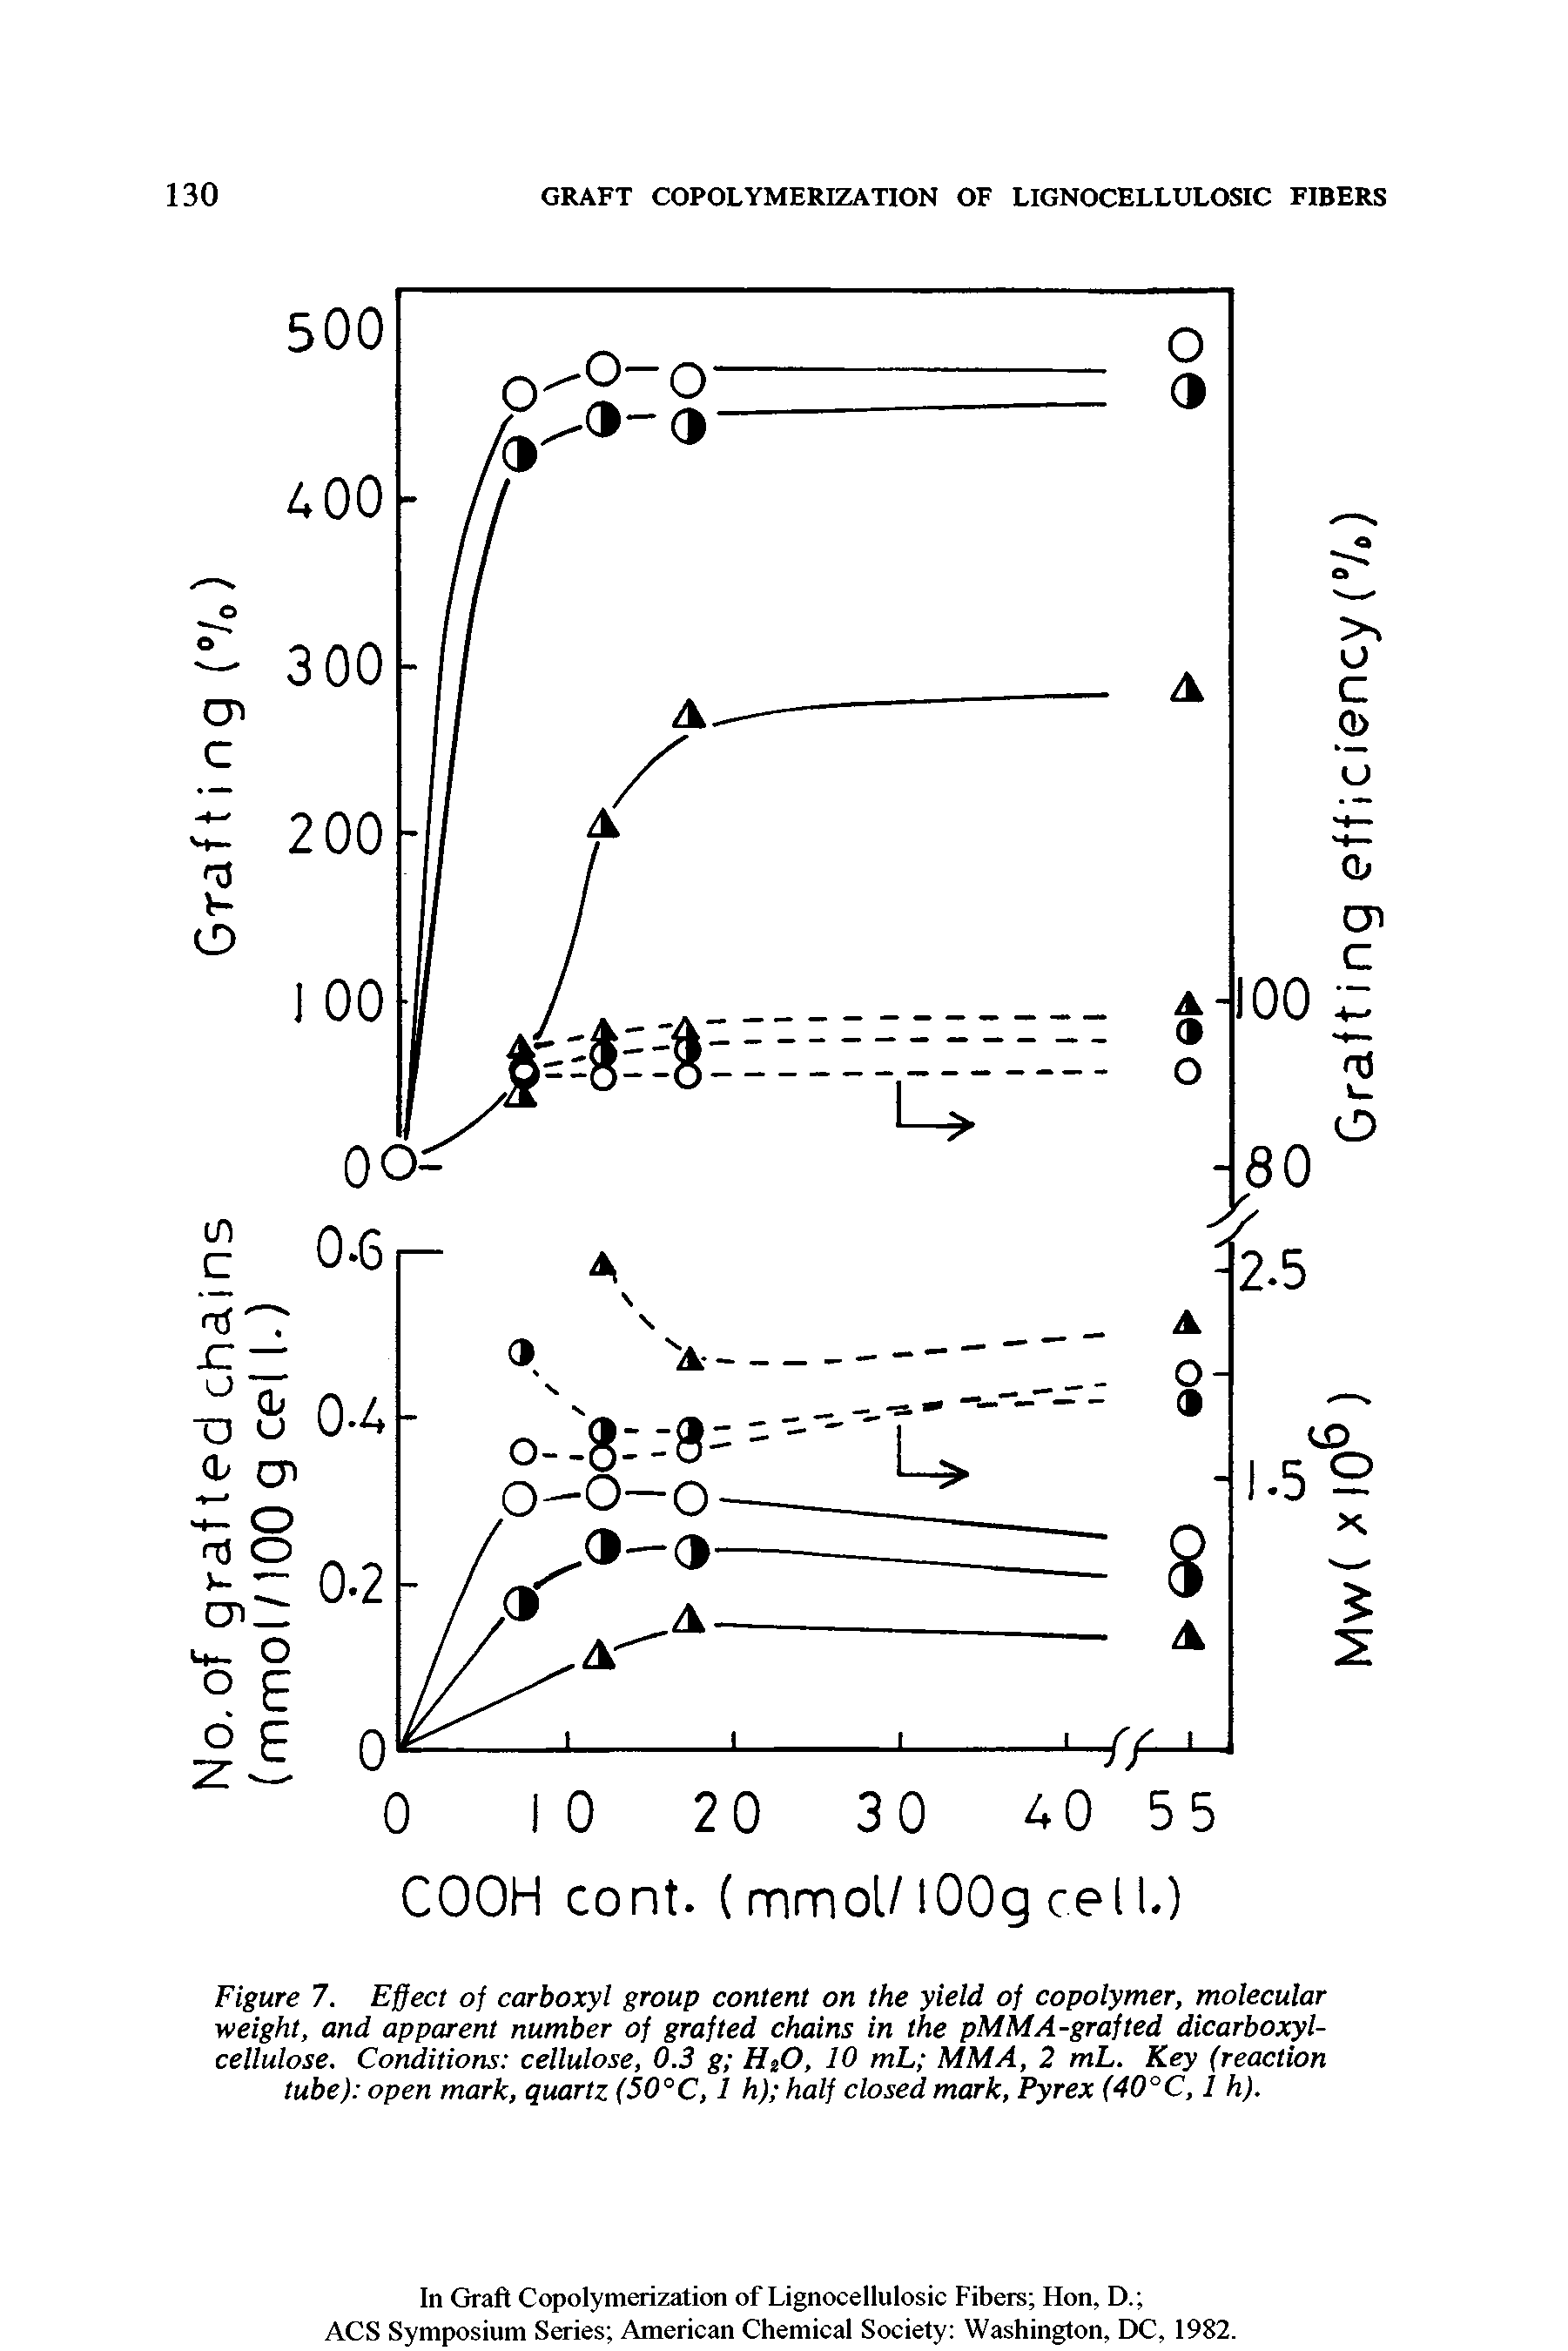 Figure 7. Effect of carboxyl group content on the yield of copolymer, molecular weight, and apparent number of grafted chains in the pMMA-grafted dicarboxyl-cellulose. Conditions cellulose, 0.3 g H O, 10 mL MMA, 2 mL. Key (reaction tube) open mark, quartz (50°C, 1 h) half closed mark, Pyrex (40°C, 1 h).